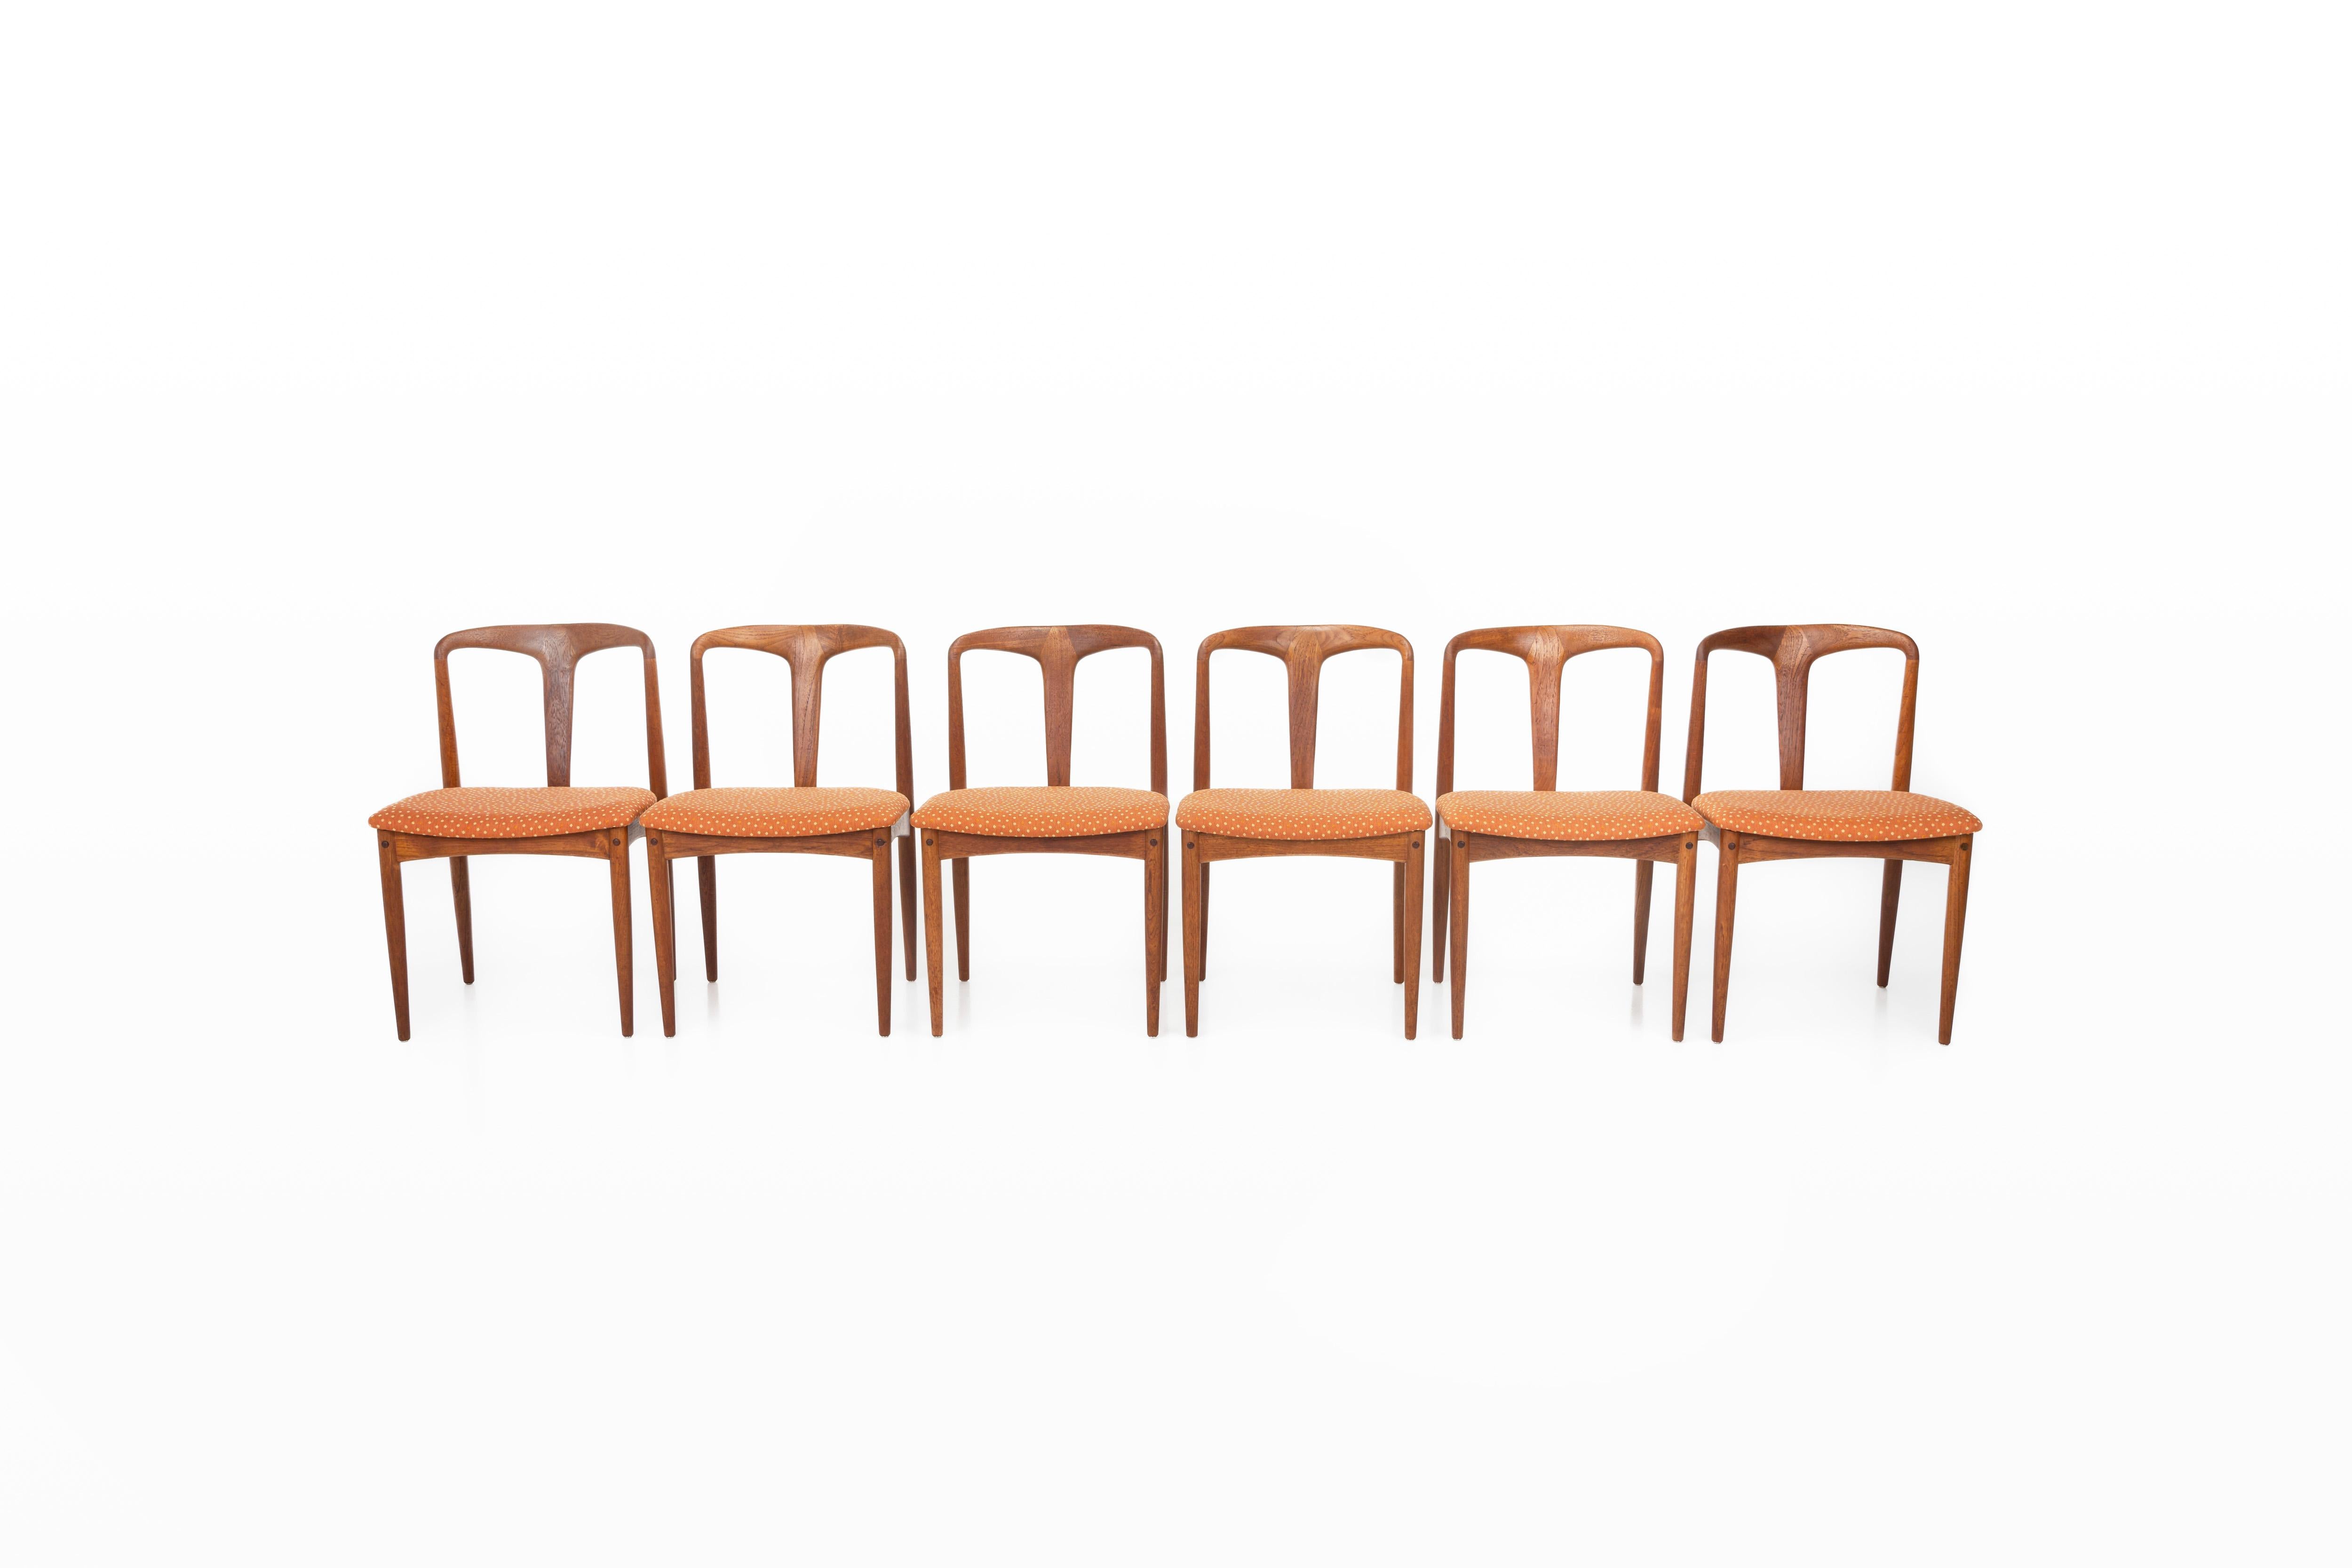 Set of 6 vintage 'Juliane' dining room chairs. These chairs are designed by Johannes Andersen for Uldum Møbelfabrik in Denmark. They have a teak frame, an orange dotted fabric and are in very good condition. Marked by the